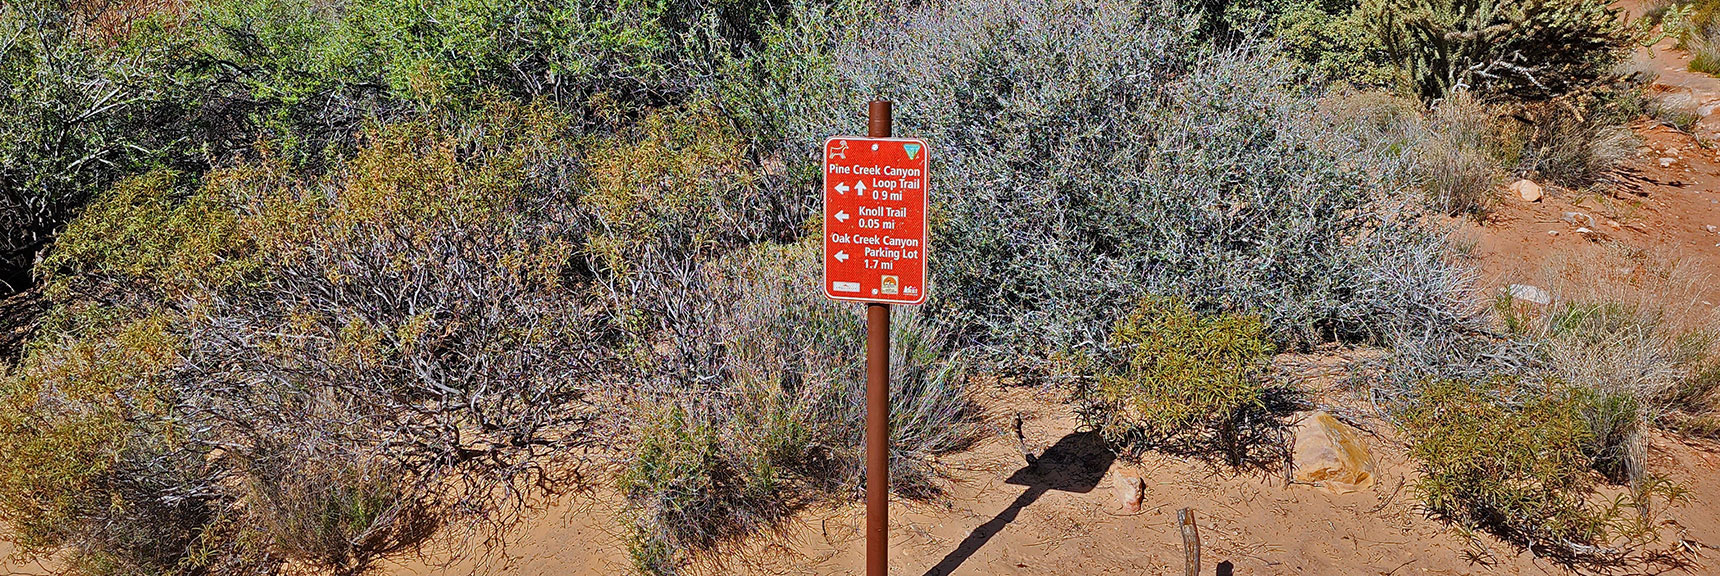 Directional Sign + Distances at Knoll Northern Trailhead | Knoll Trail | Red Rock Canyon National Conservation Area, Nevada | David Smith | LasVegasAreaTrails.com